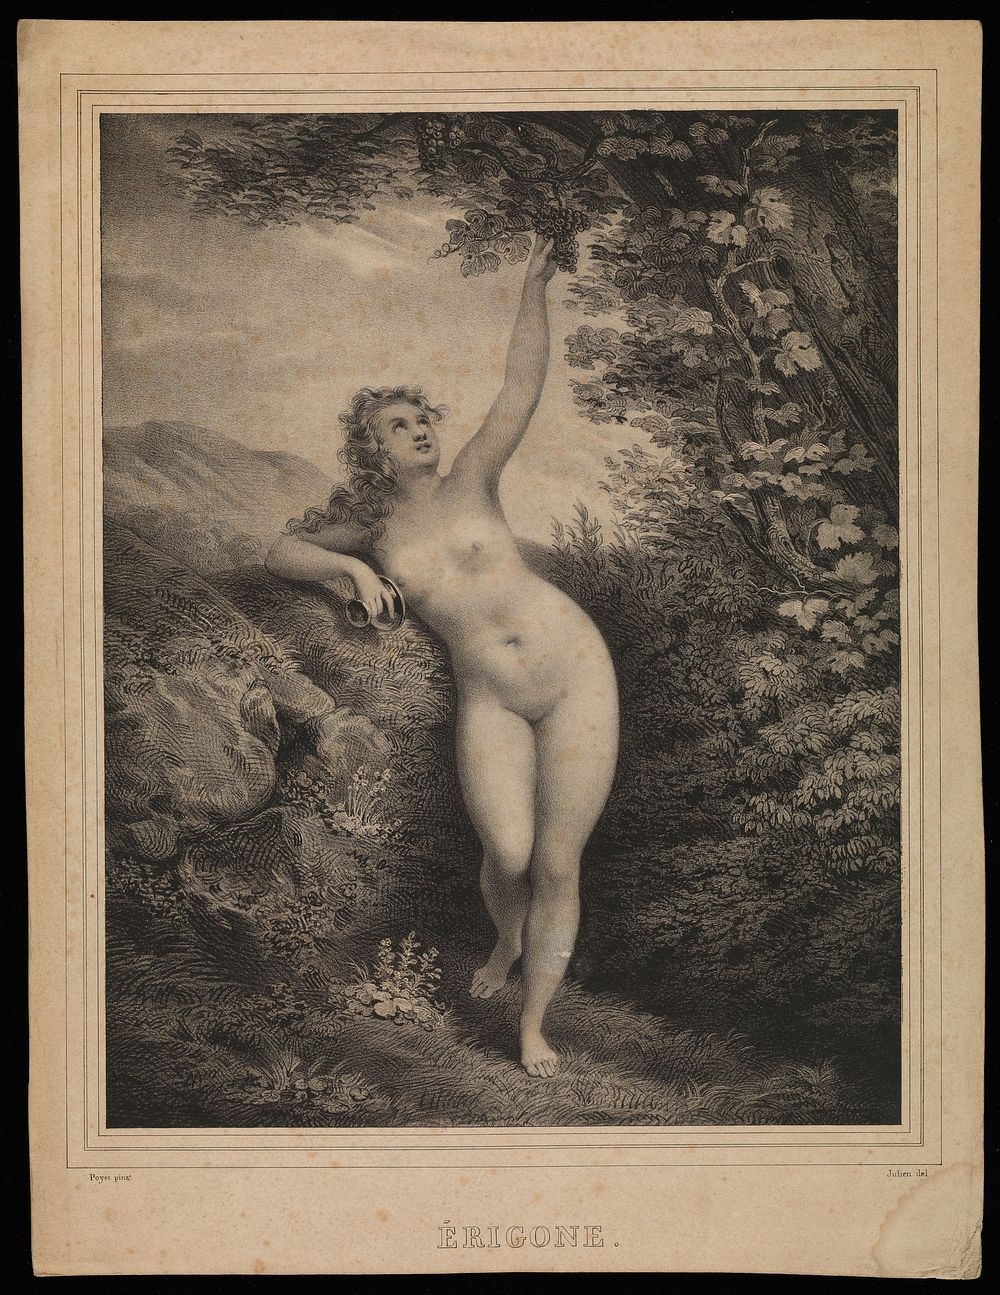 Erigone, ensnared by Dionysus, reaching for grapes on a vine. Lithograph by B.-R. Julien, 1835, after L. Poyet.